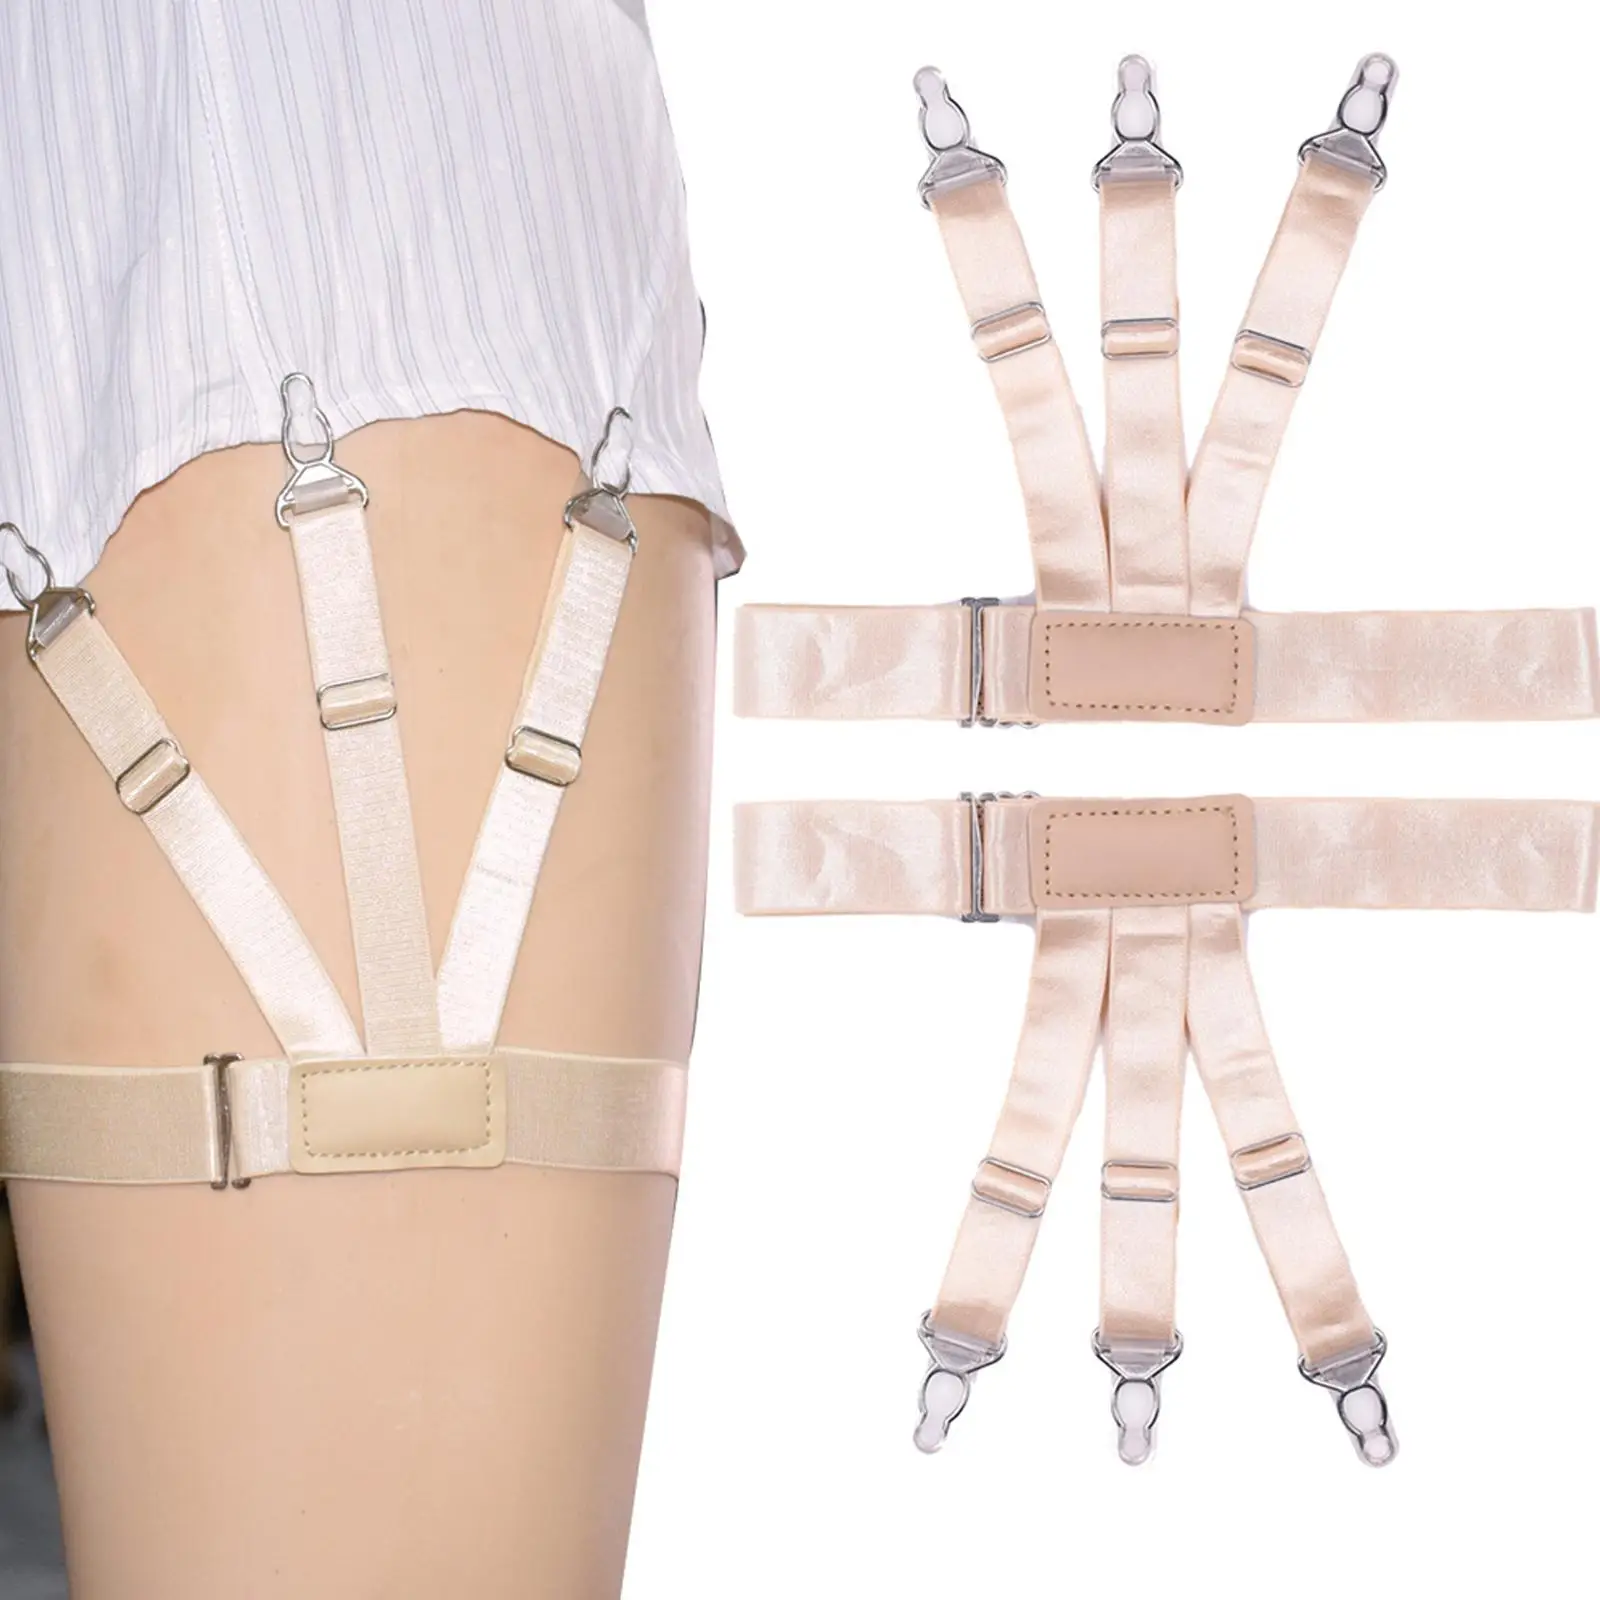 Shirt Stays Thigh Suspenders Comfortable with Non Slip Locking Clips Elastic Shirt Garters for Unisex Keeping Shirt Tucking